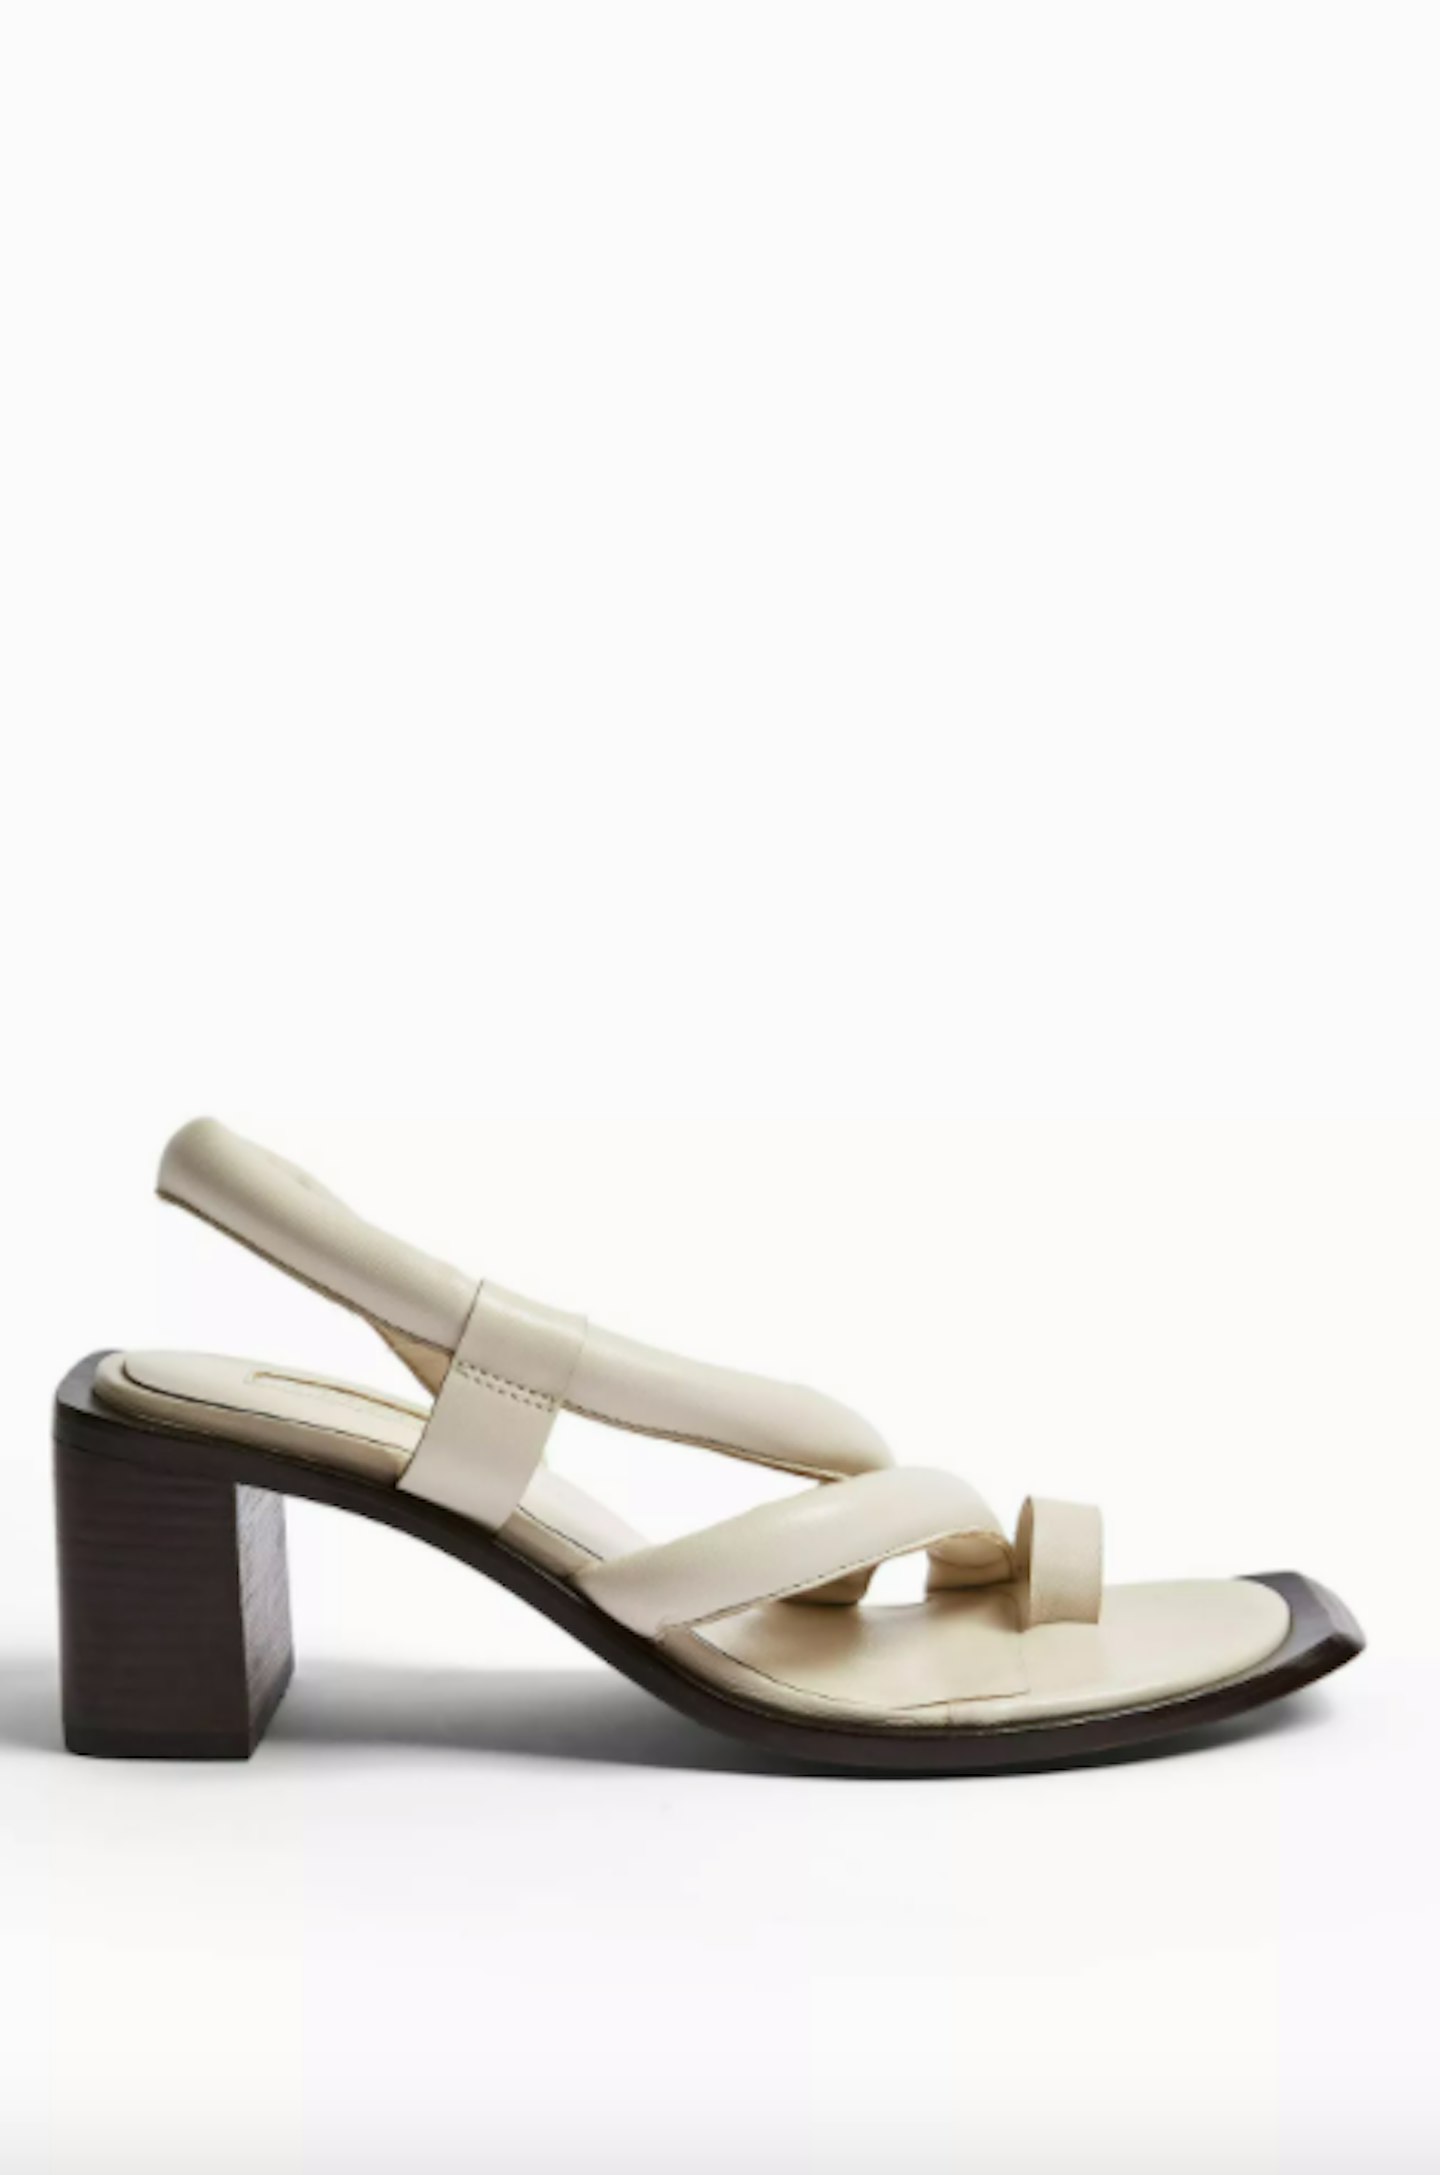 Topshop, Padded Sandals, WAS £49, NOW  £40